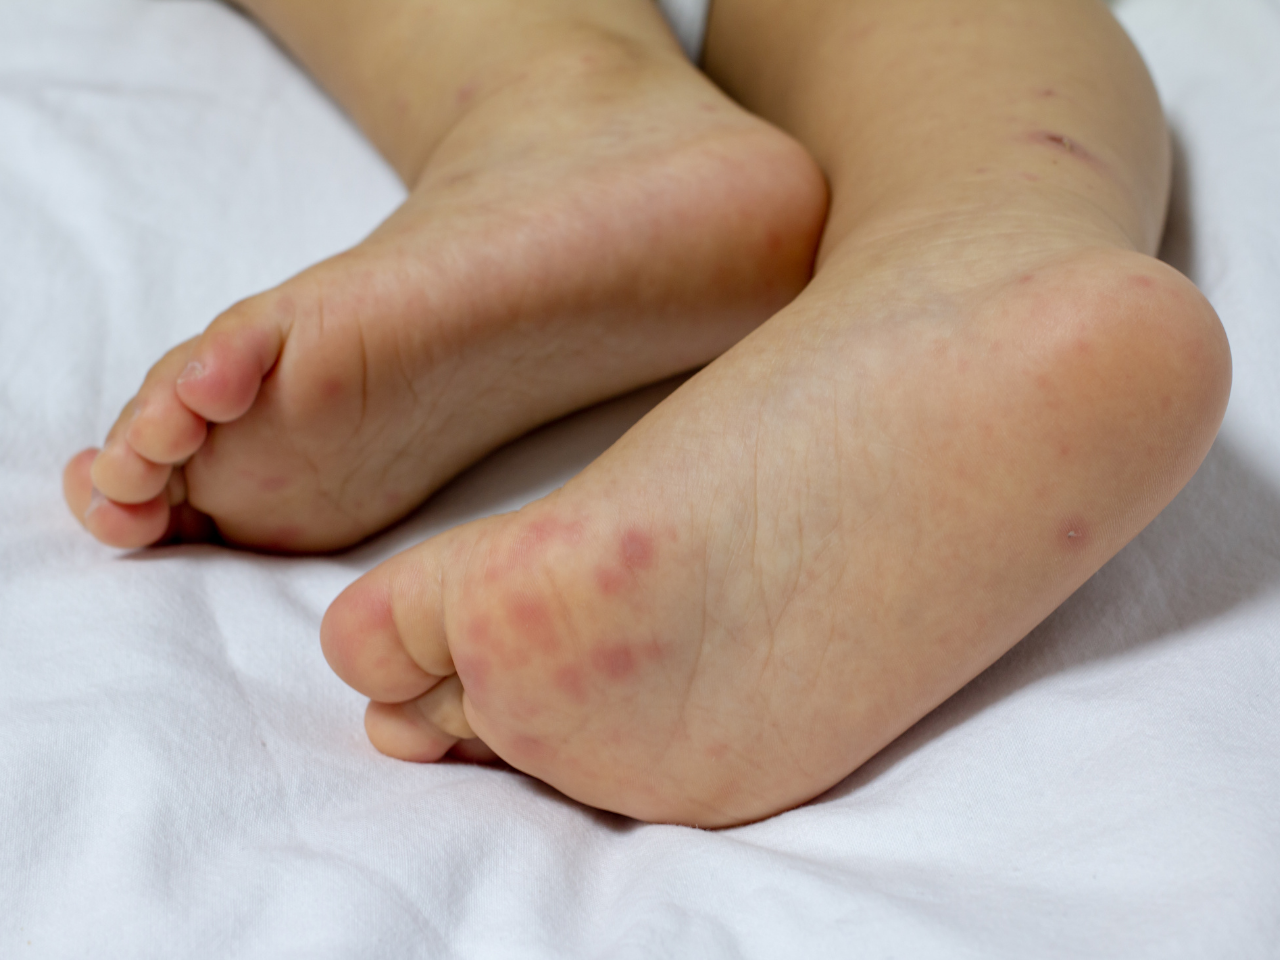 Hand Foot Mouth Disease - feet affected